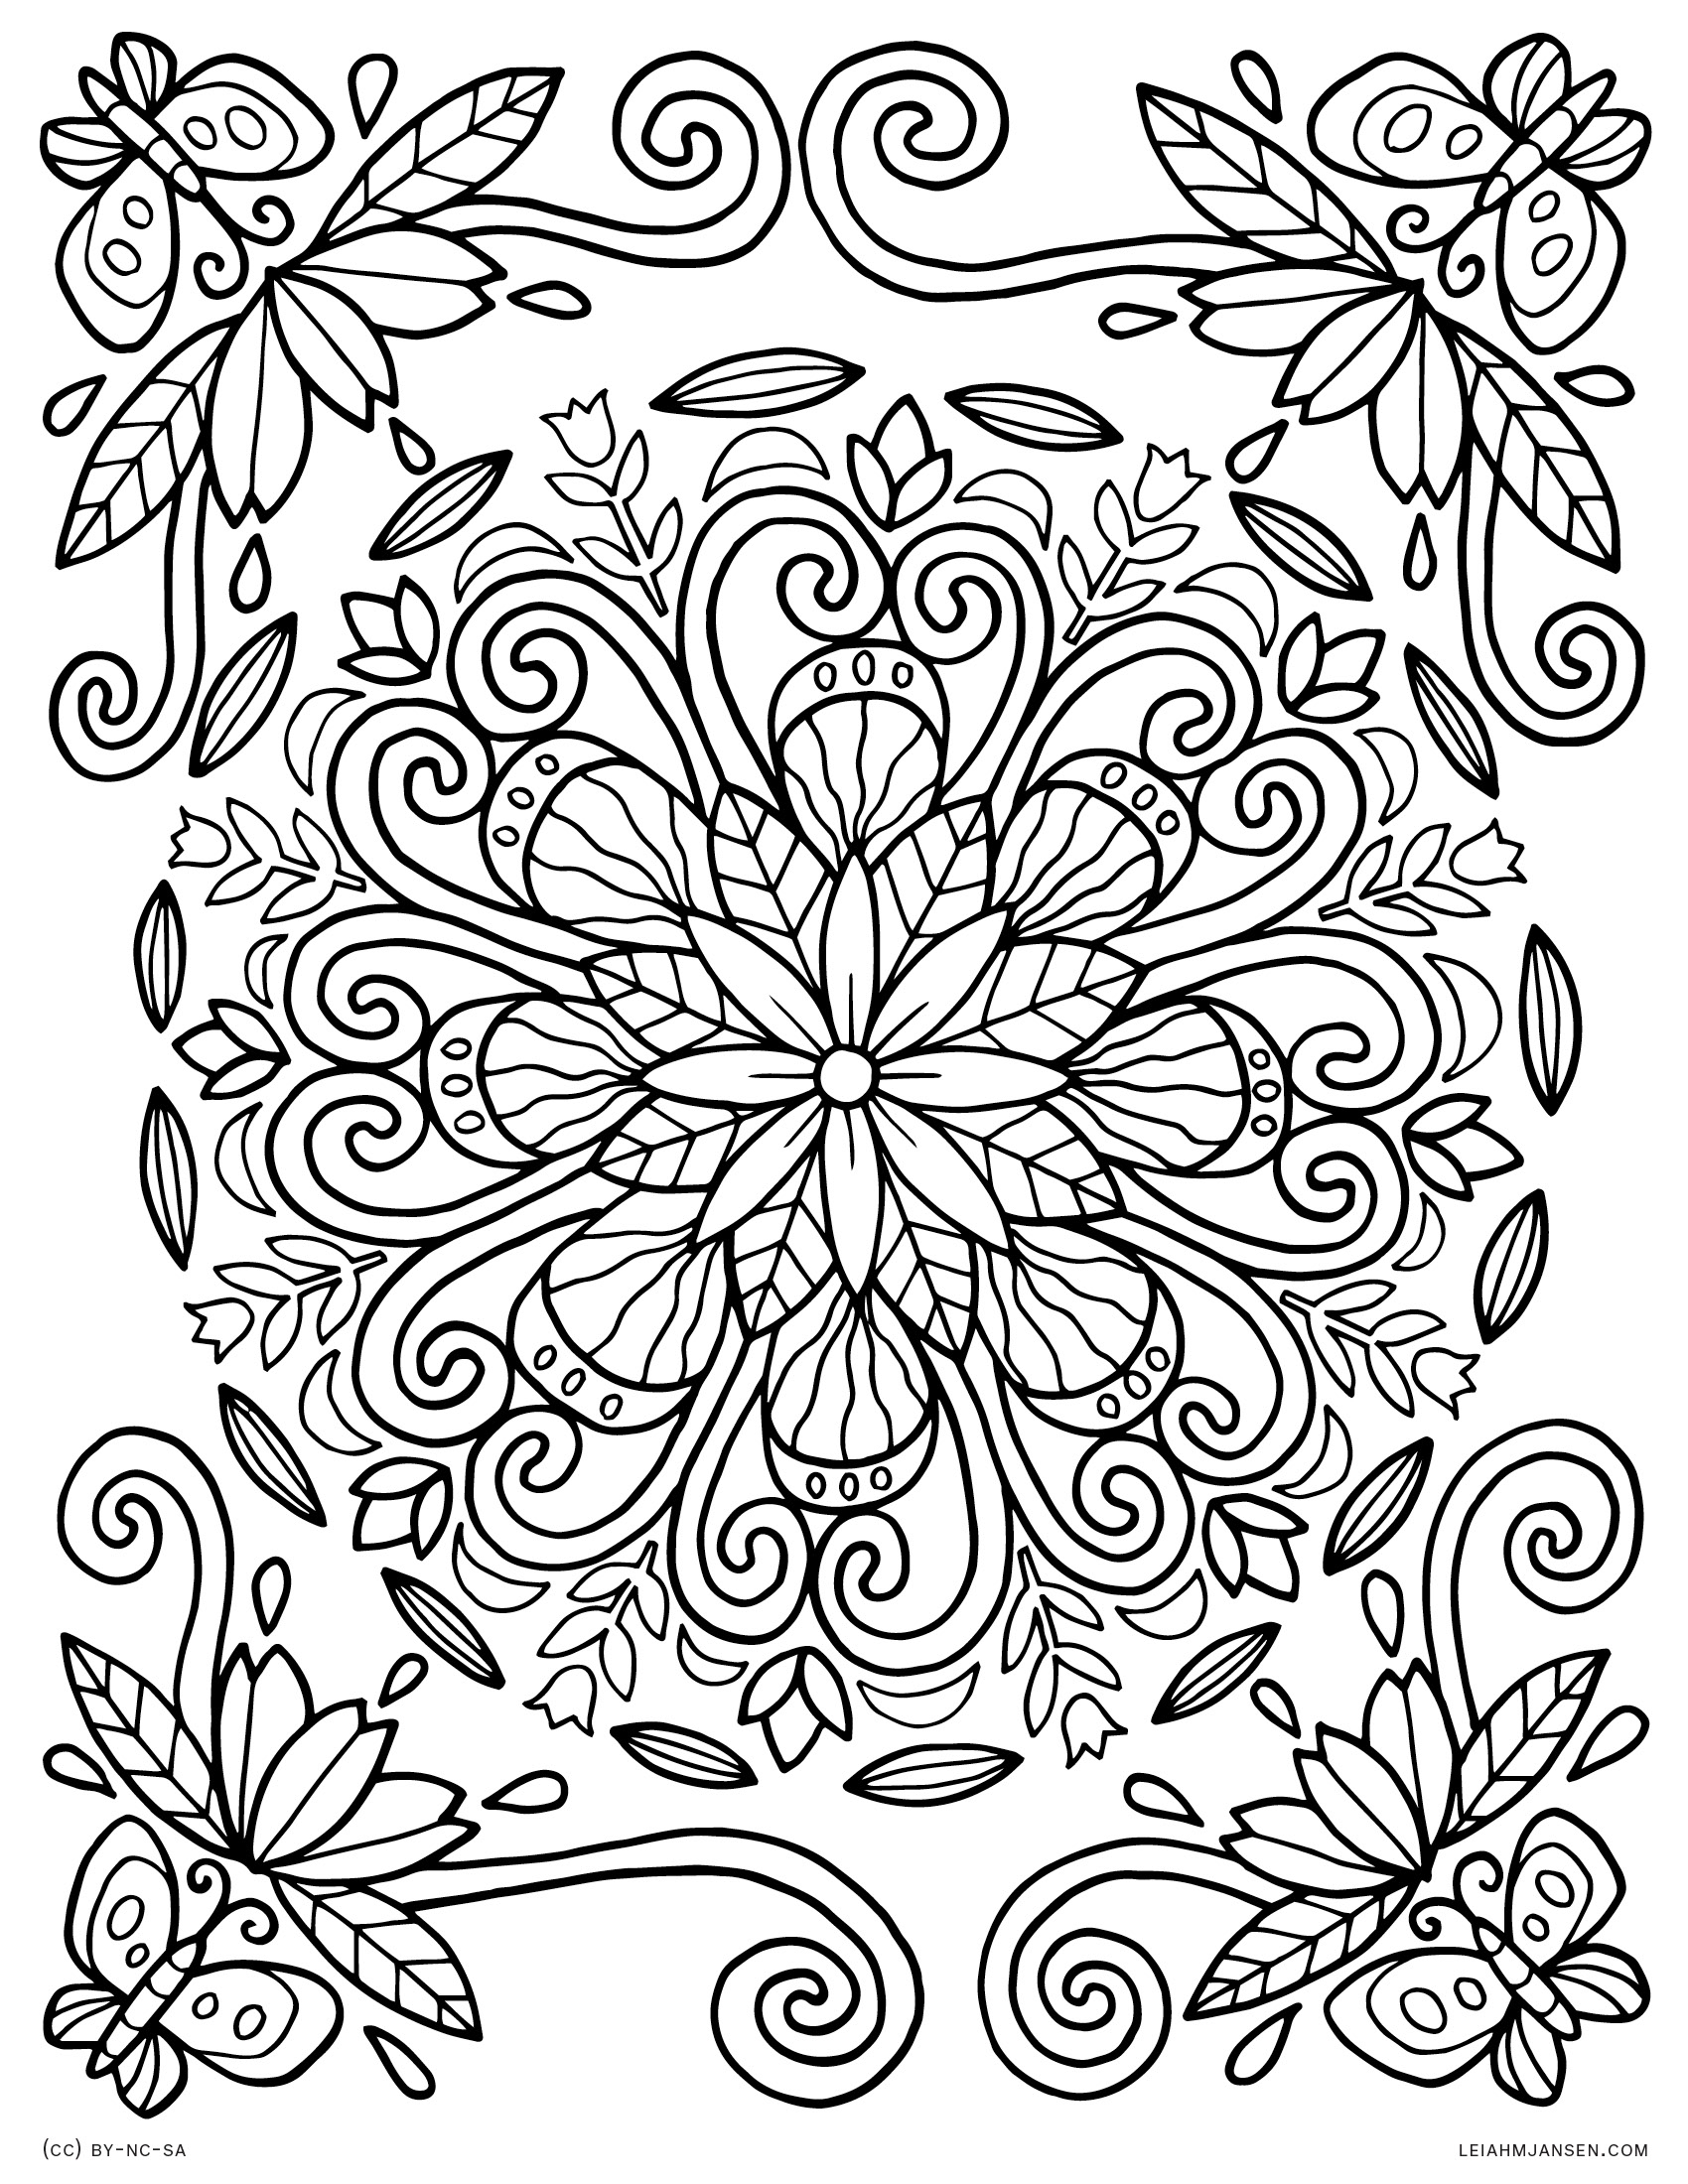 Butterfly Mandala Coloring Pages at GetColorings.com | Free printable